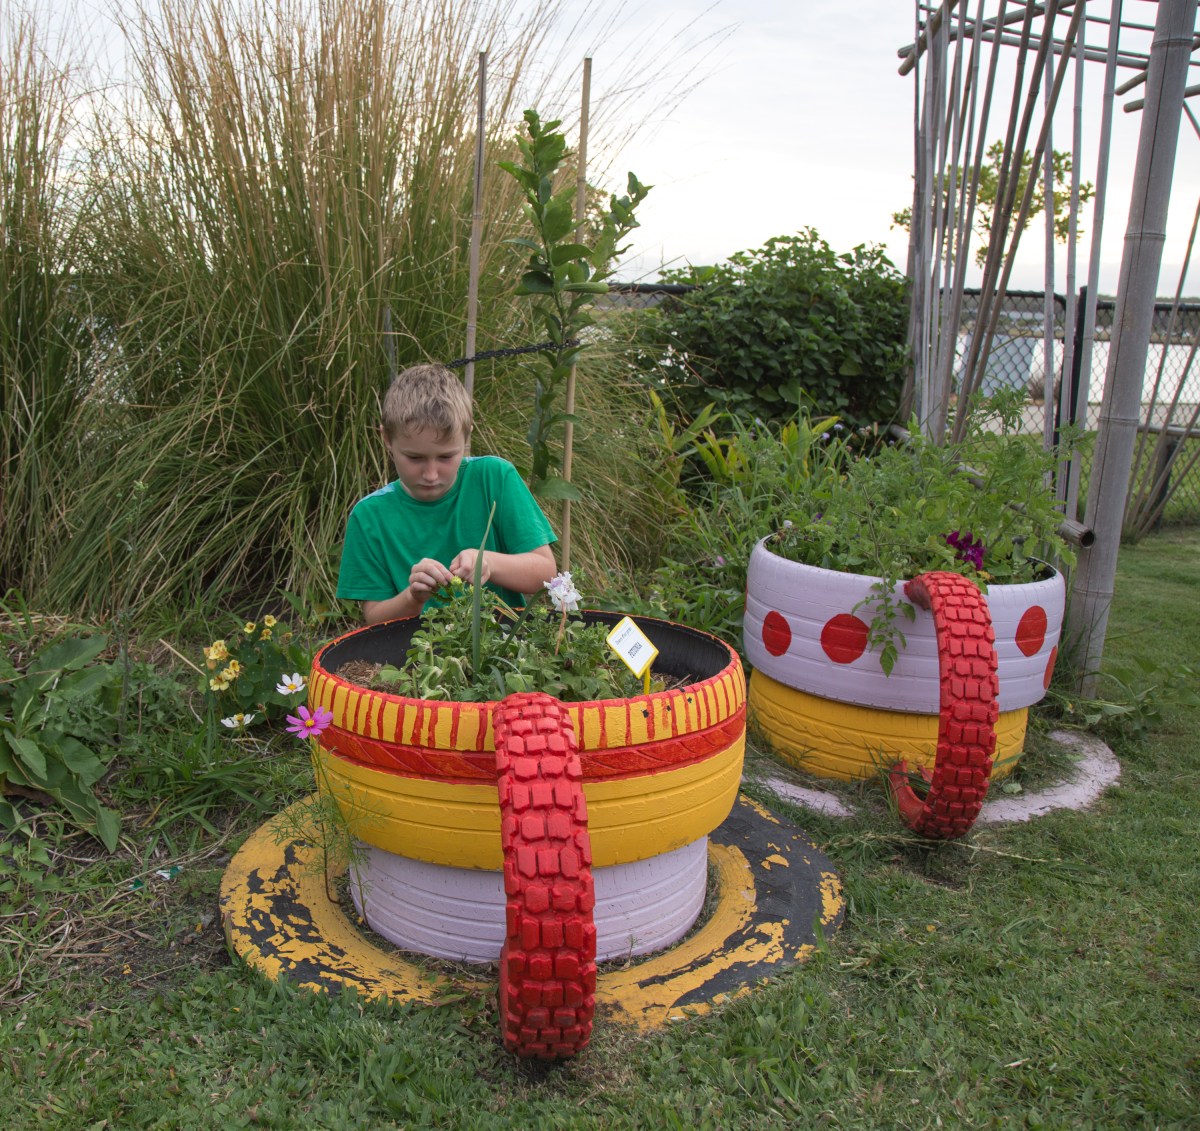 A kid works with plants in a planter made of painted tires.